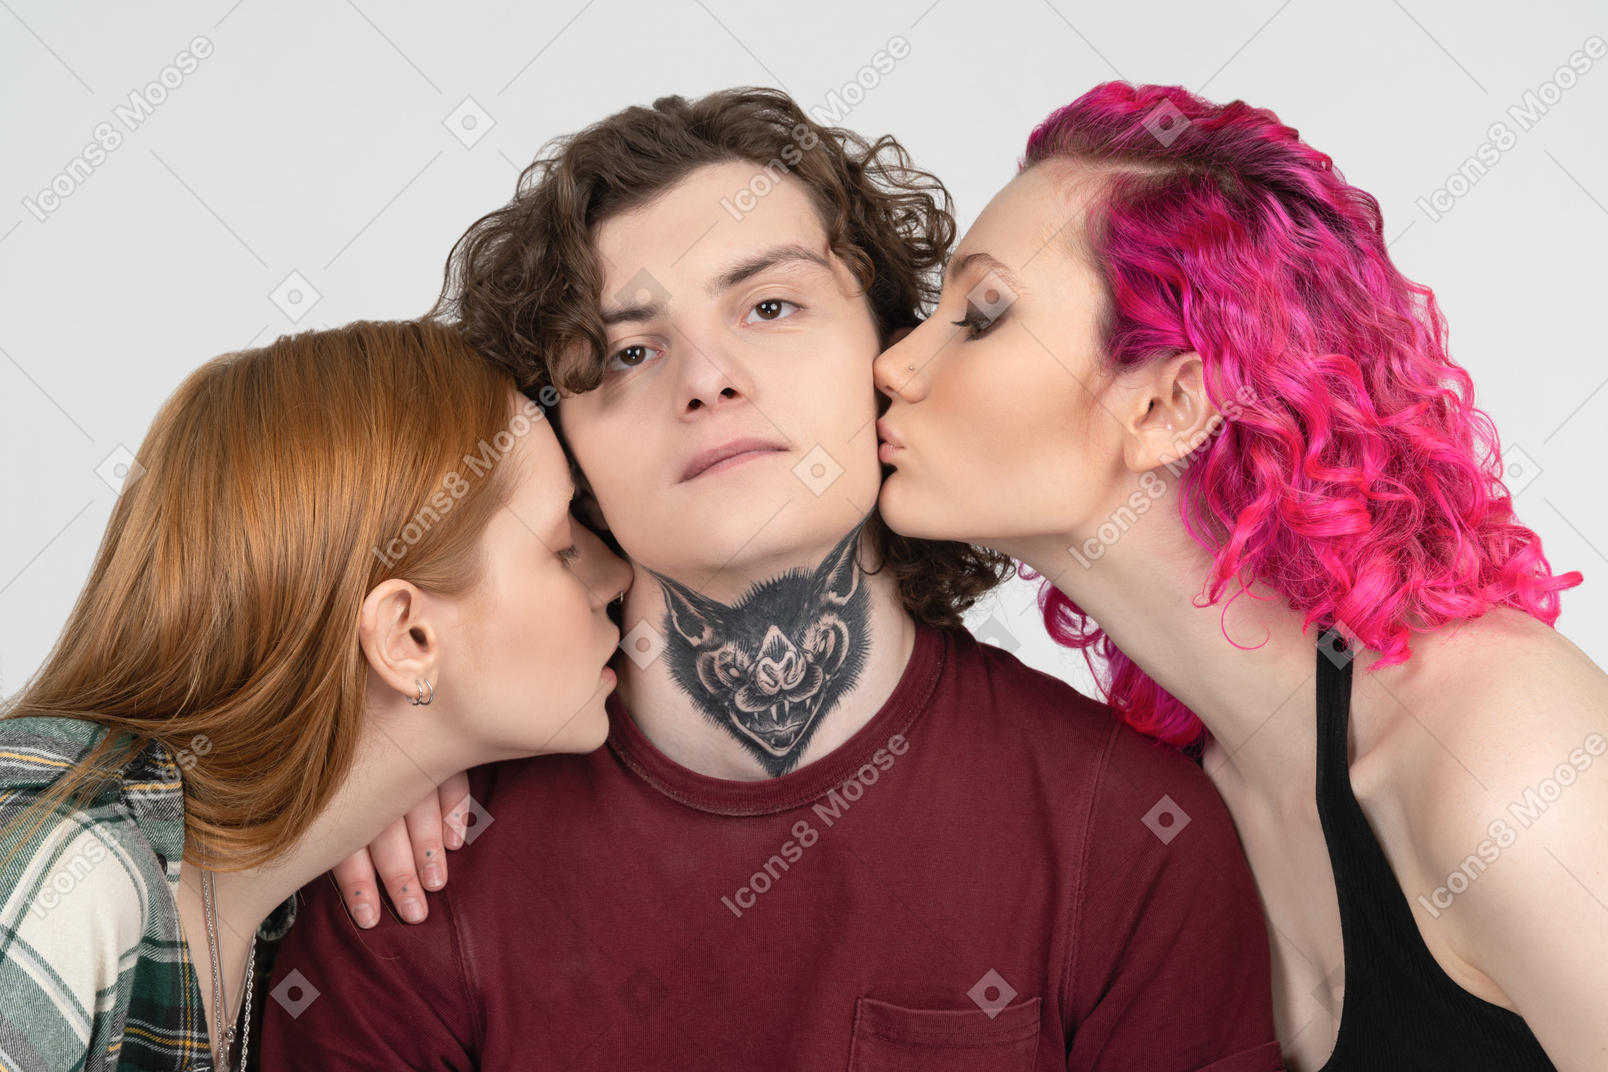 Guy with tattoo being kissed by two teenage girls